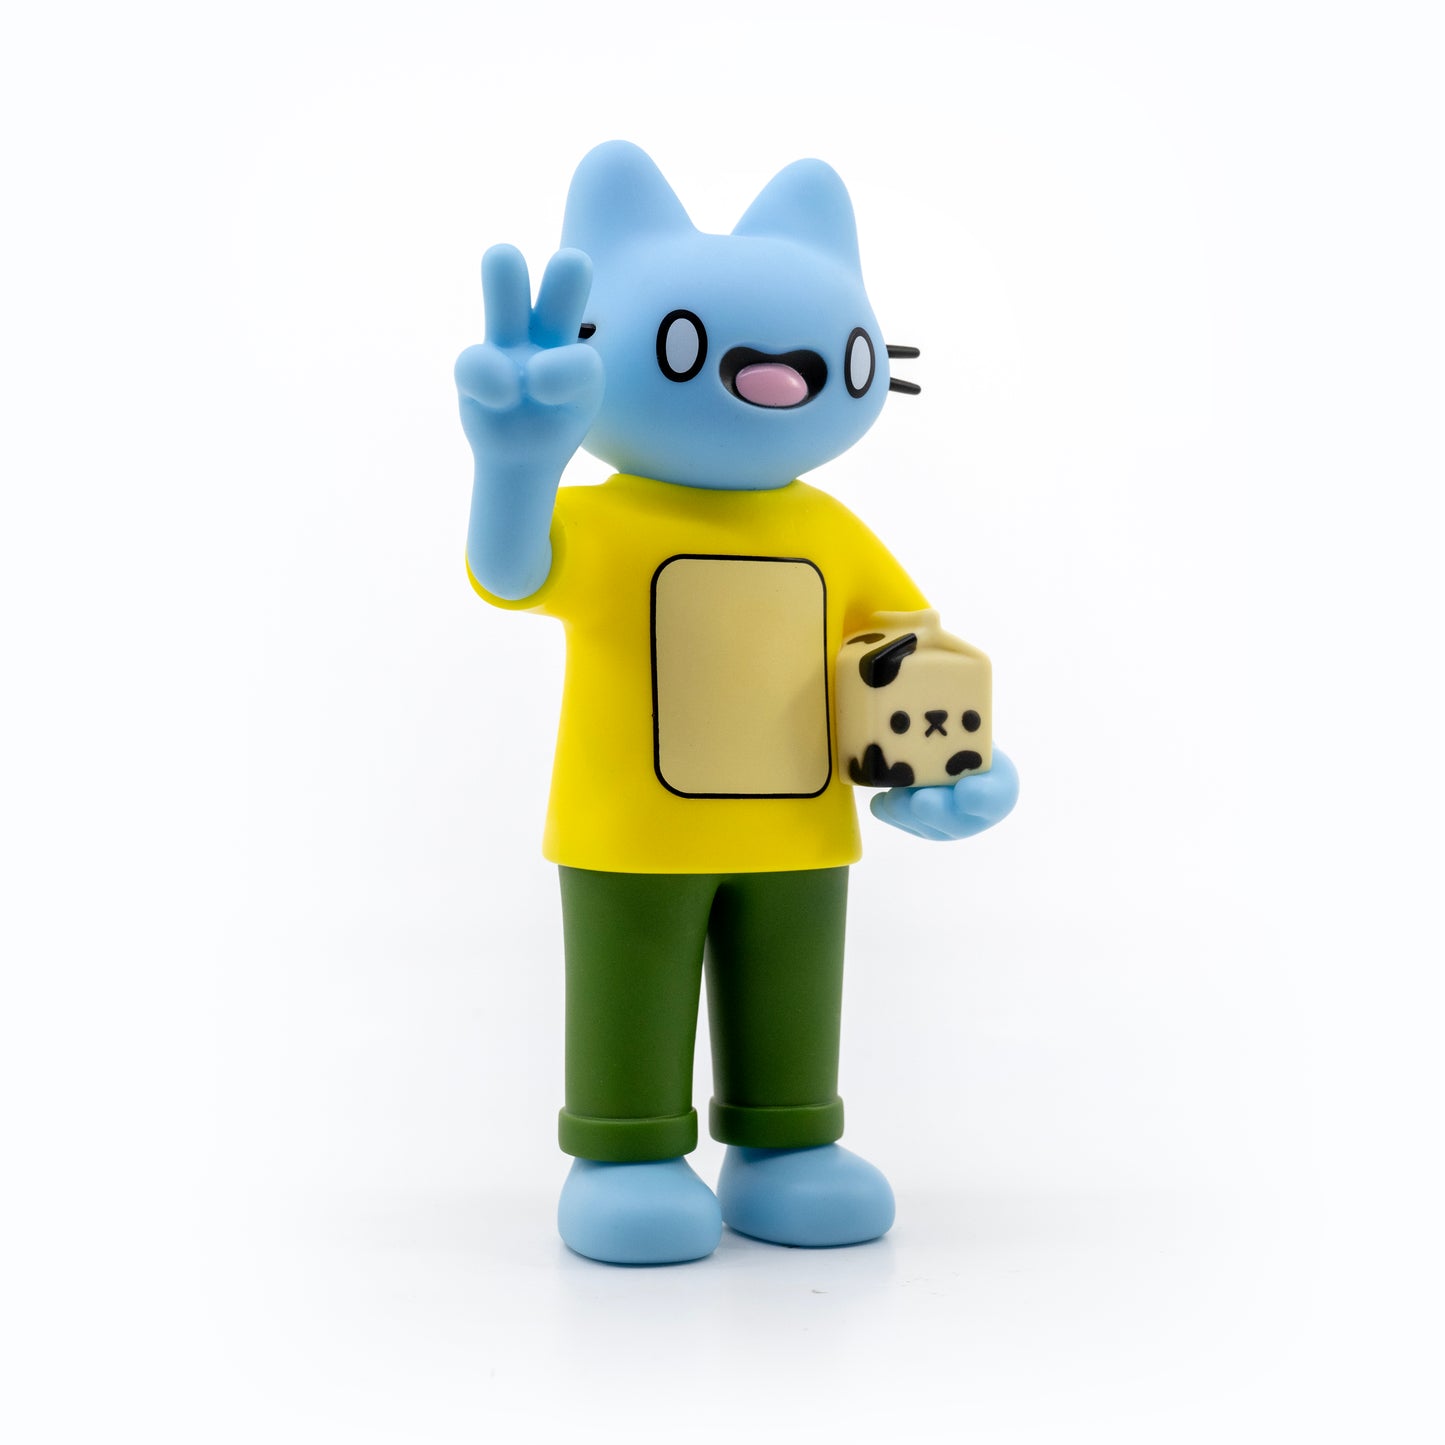 6.5" Blue and Chugs Vinyl Figure - Macy's Parade Exclusive!